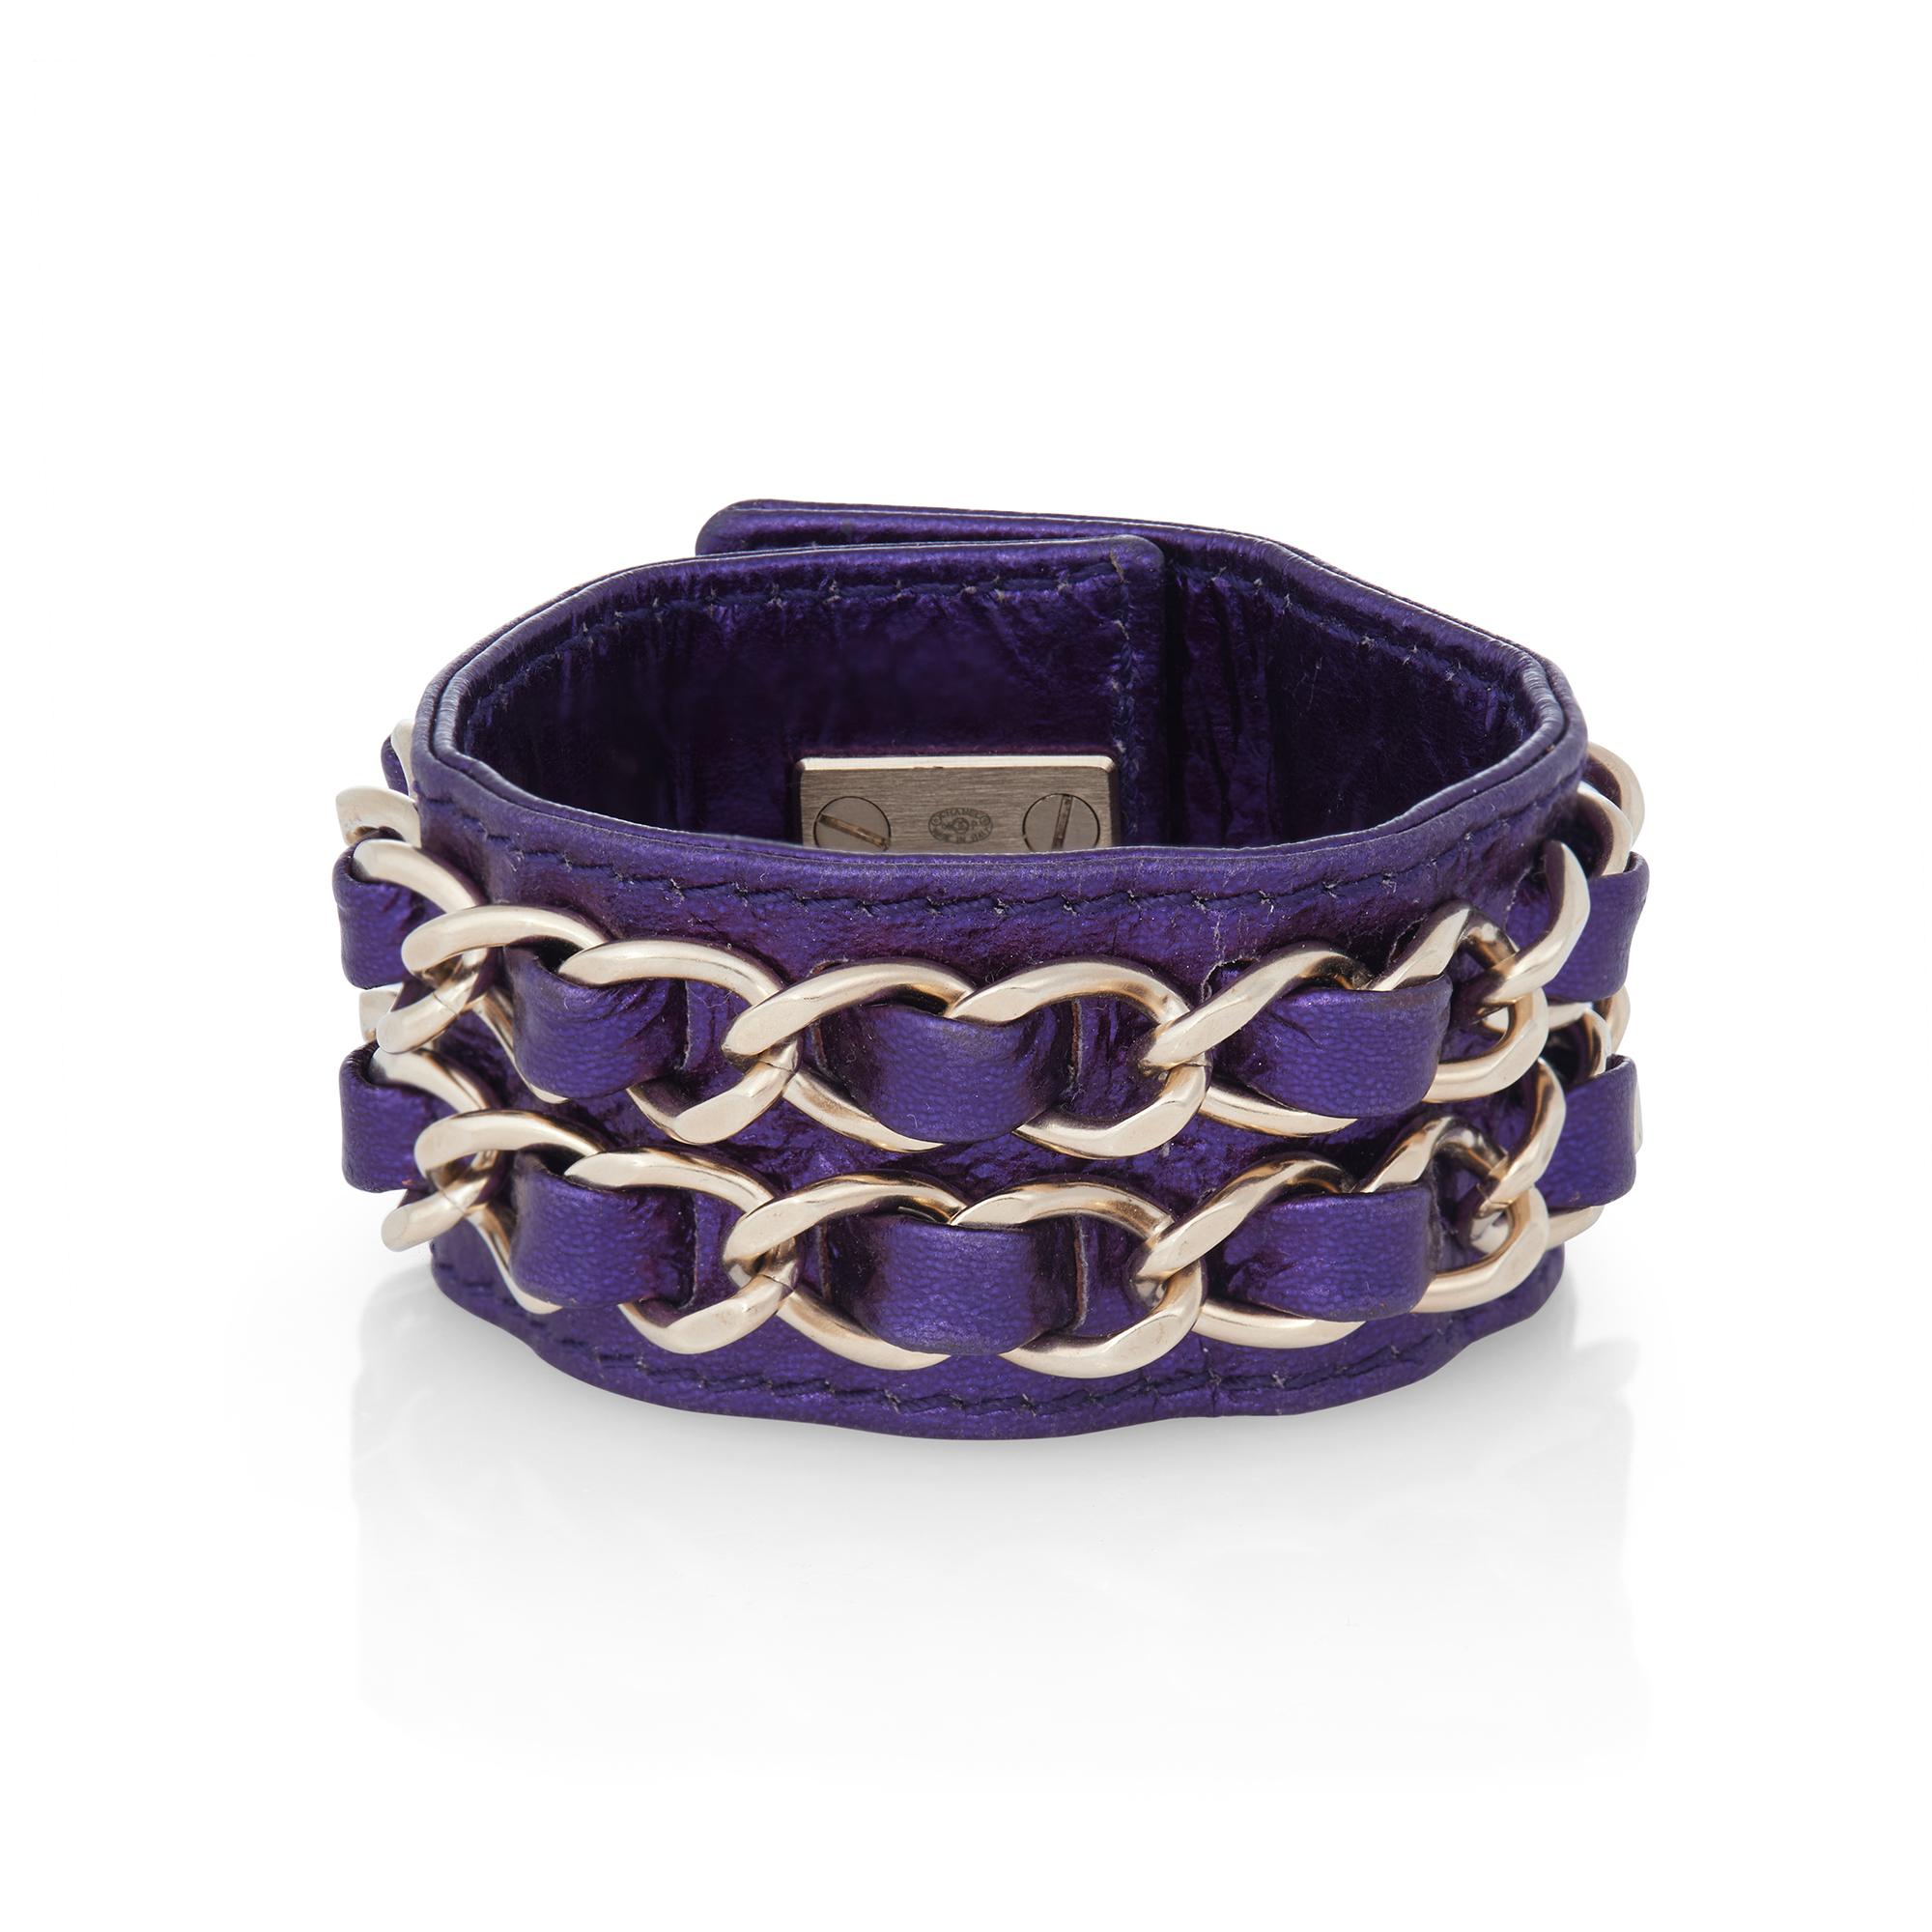 Authentic Chanel bracelet crafted in metallic purple leather and featuring silvertone chain detail.  The bracelet measures 8 inches in total length and 1.22 inches wide.  Bracelet is not presented with the original box or papers.  CIRCA